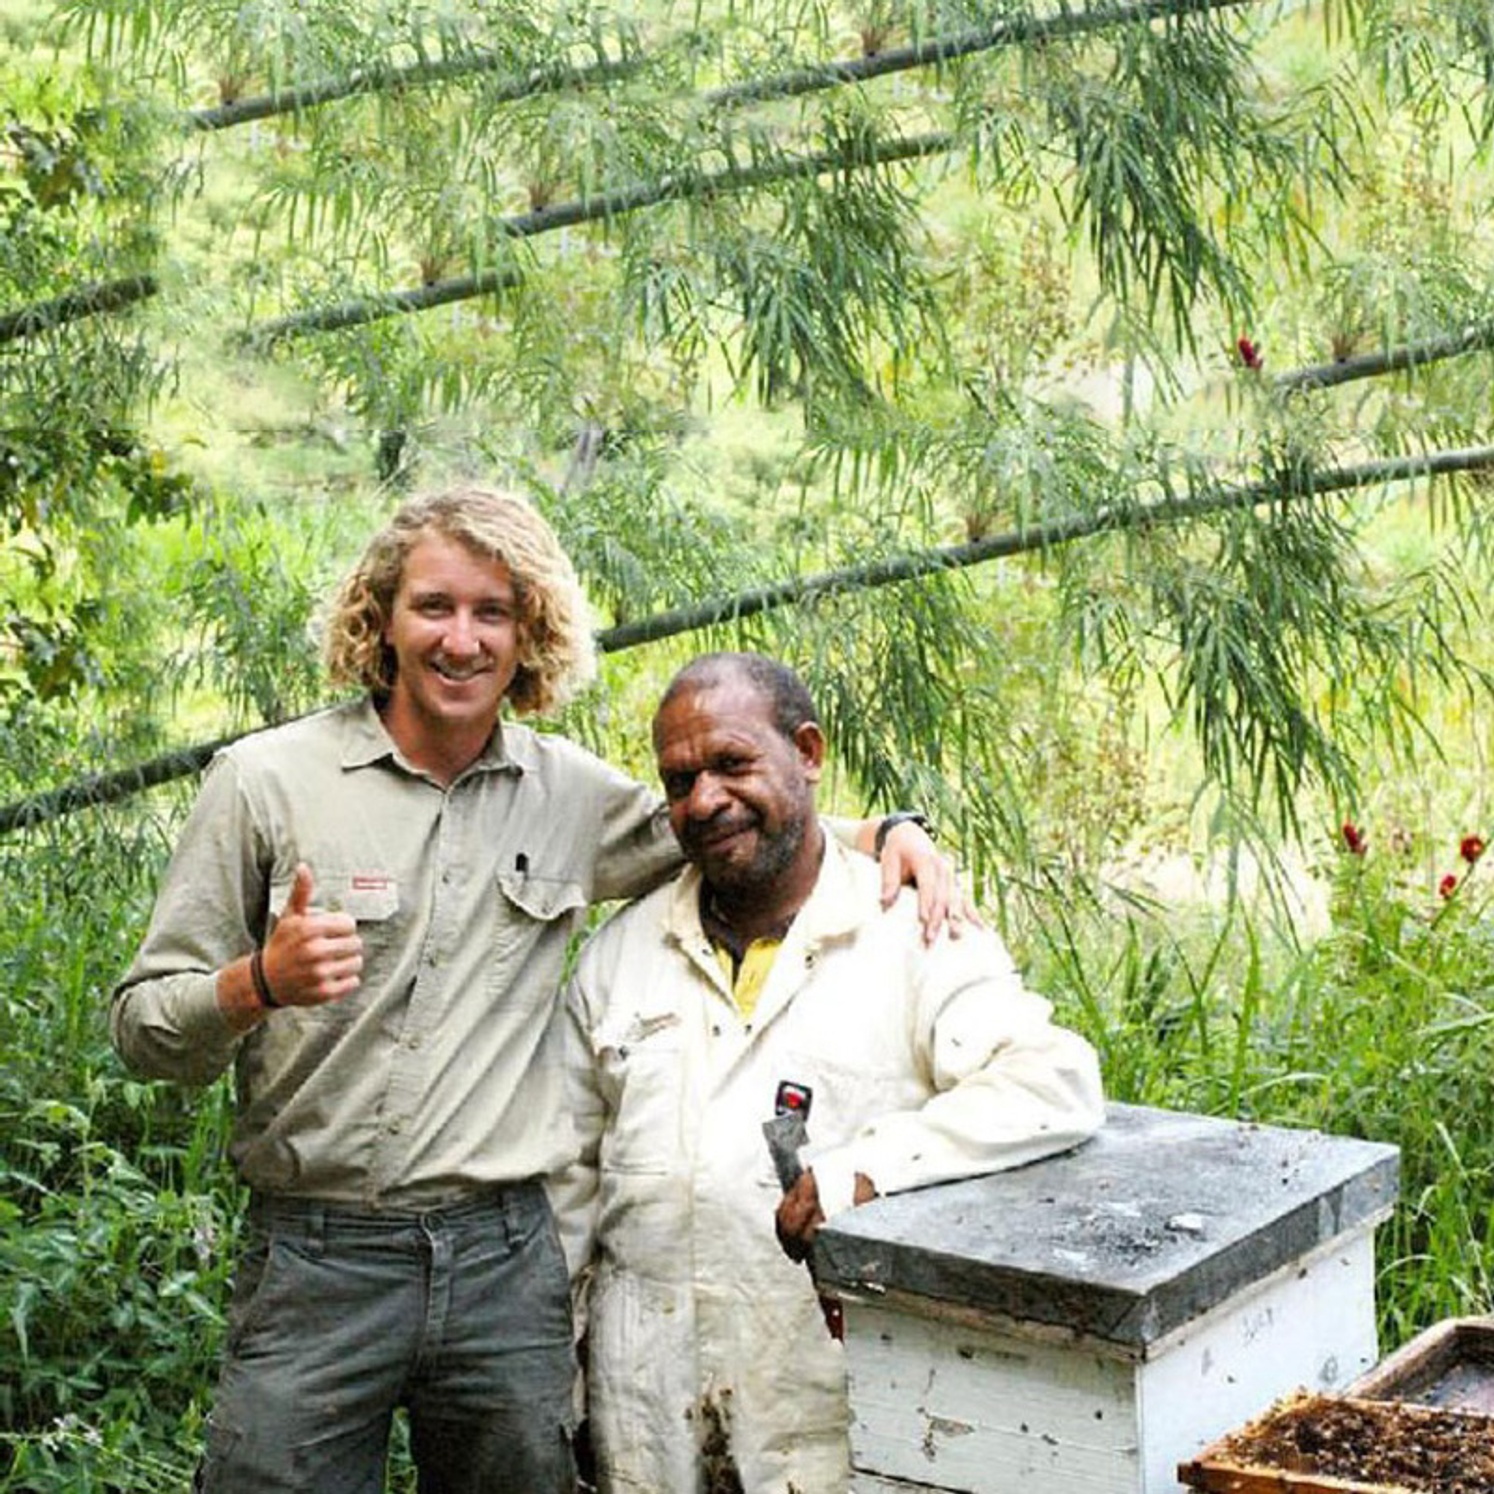 Cooper Schouten with a colleague and a beehive